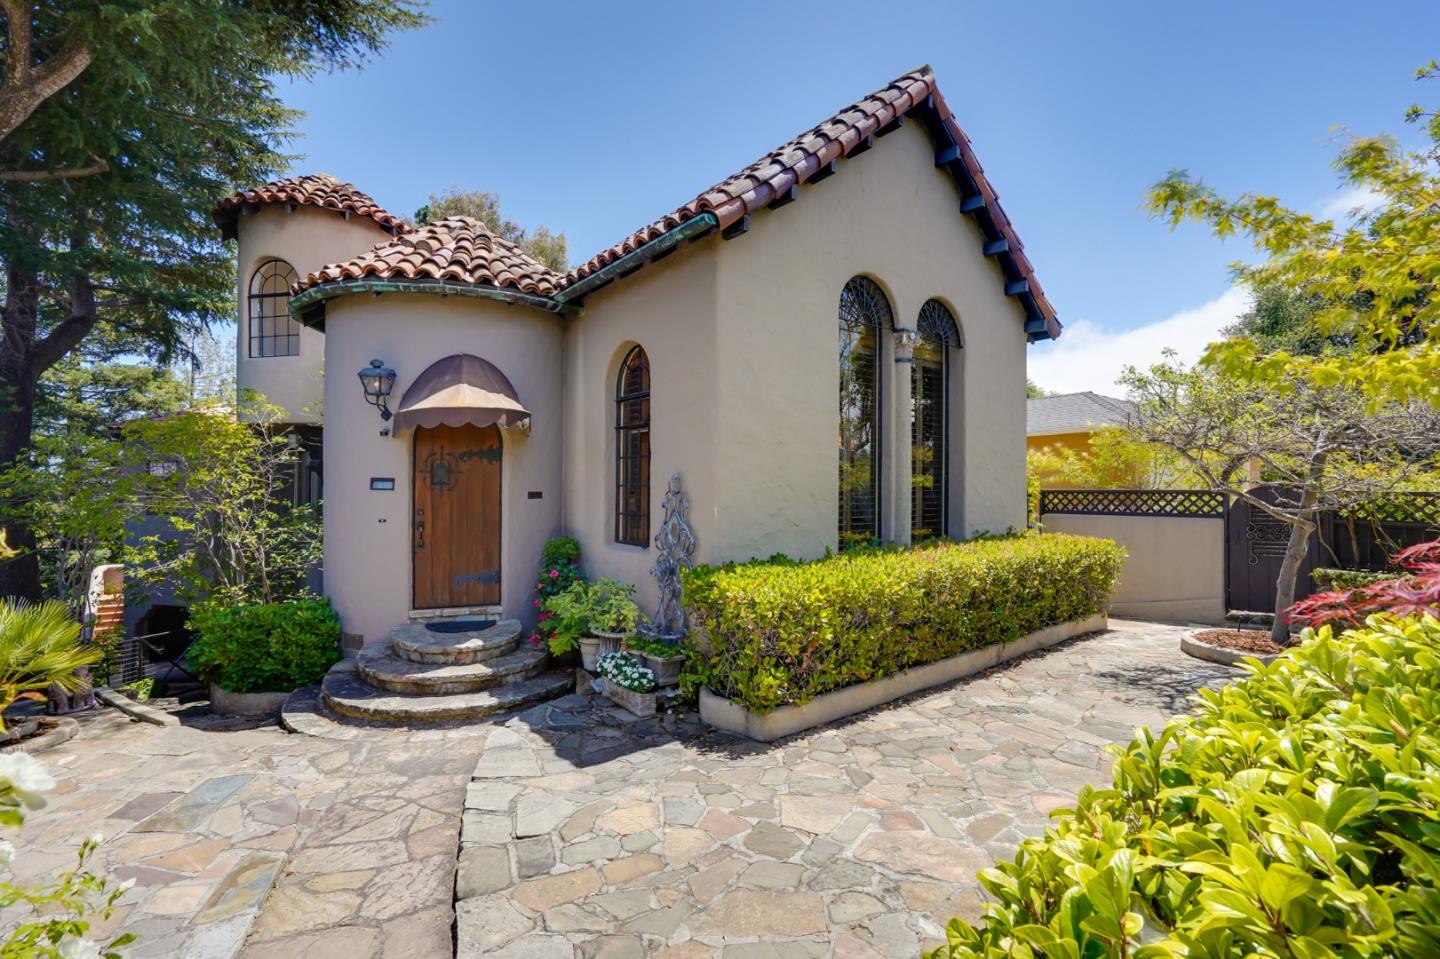 This Spanish-style home is very special, invoking fairy-tale like emotions with its stone pathways, charming fountains, & THAT VIEW! 377 Georgetown combines the sophistication and charm of the 1930s w/ the demands of the modern lifestyle. Blending seamlessly w/ the awe-inspiring 1933 construction, the magnificent kitchen-family room addition is truly the heart of this home, offering an abundance of space for the hustle & bustle of morning rush hour while remaining comfortable enough for afternoon homework & cozy enough for popcorn & movie night. The classic formal dining room & convenient butlers pantry set the stage for elegant entertaining, while the bonus rumpus room, on the lower level, allows for free play & laughter. Now, that view! 2 expansive decks provide multiple opportunities to take advantage of the amazing setting & soak in that view! Main level deck offers ample space for BBQing, outdoor dining, & entertaining, while upper-level deck screams romance & star-gazing.